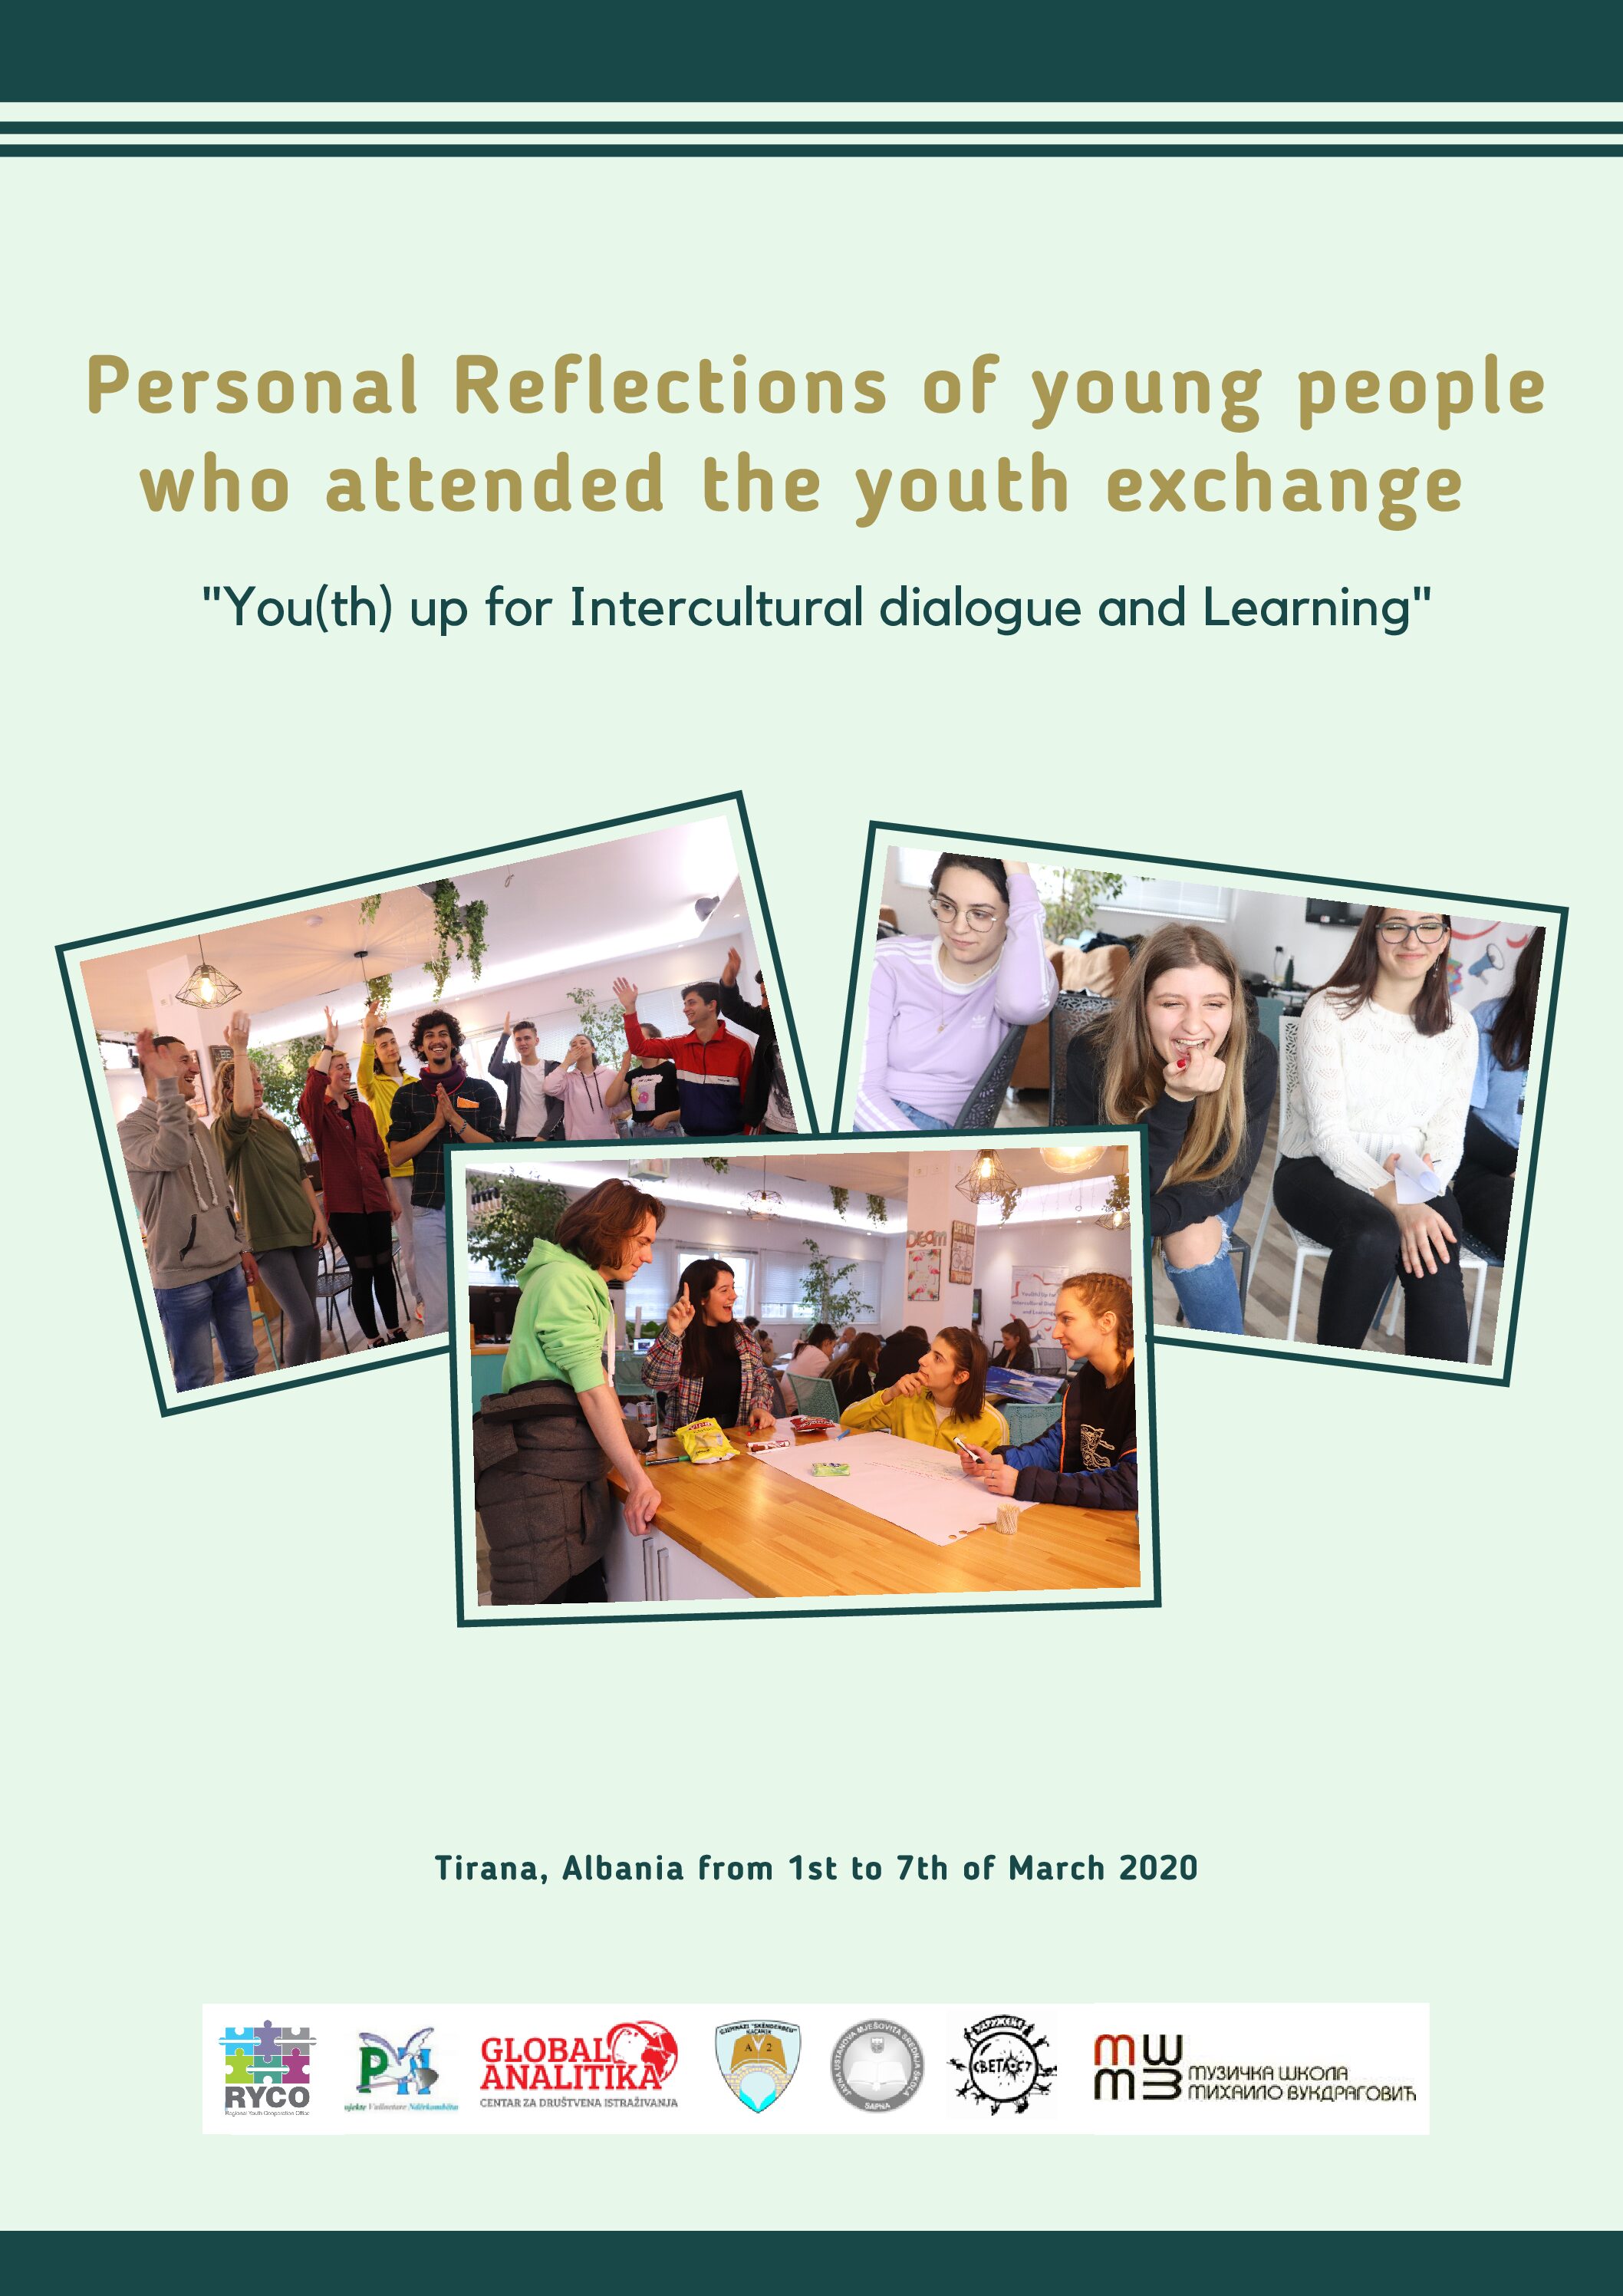 Personal Reflections of young people who attended the youth exchange